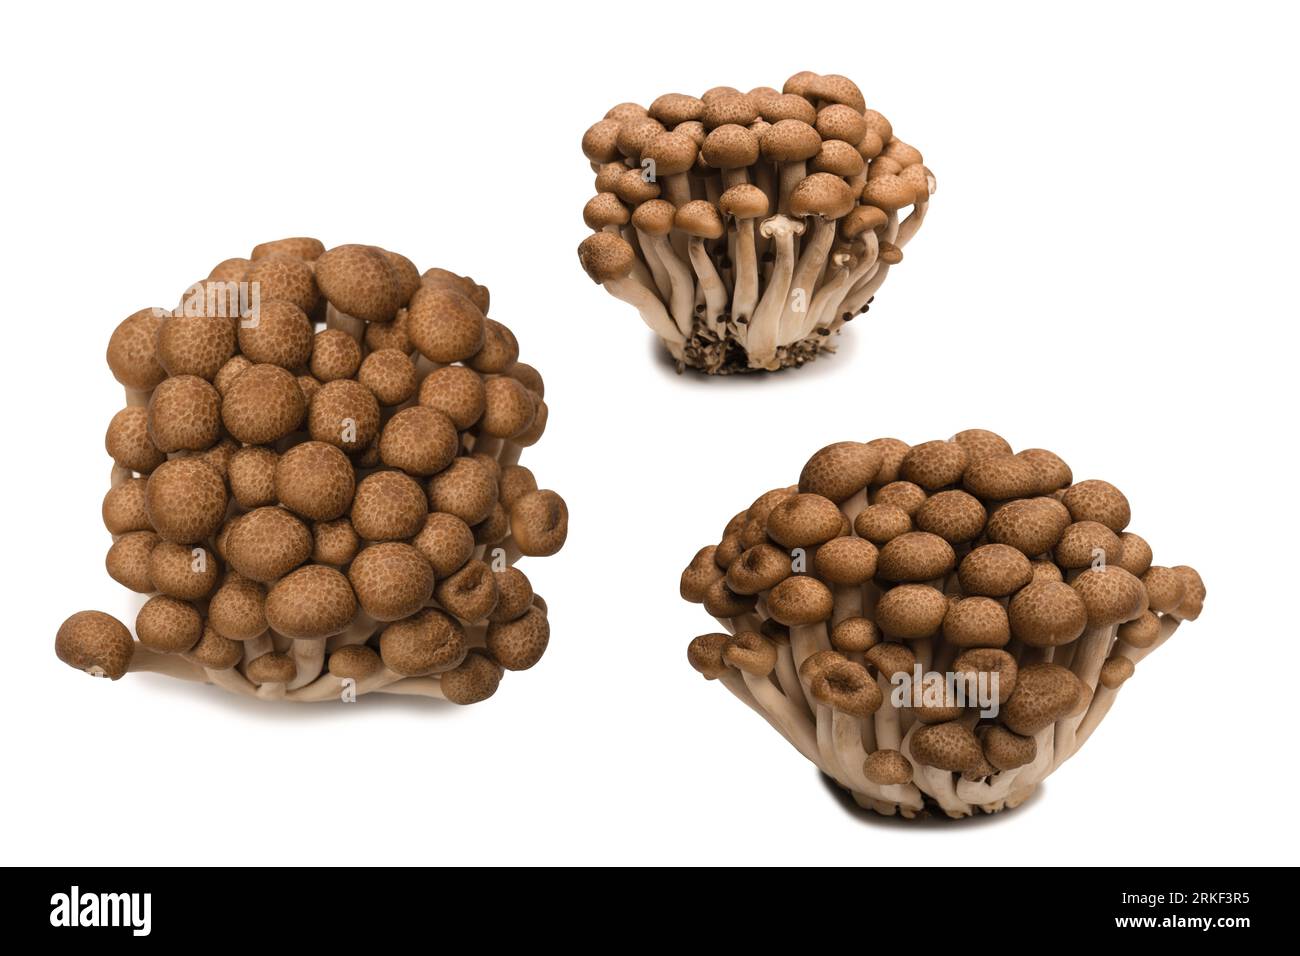 Raw beech mushrooms isolated on a white background. Stock Photo